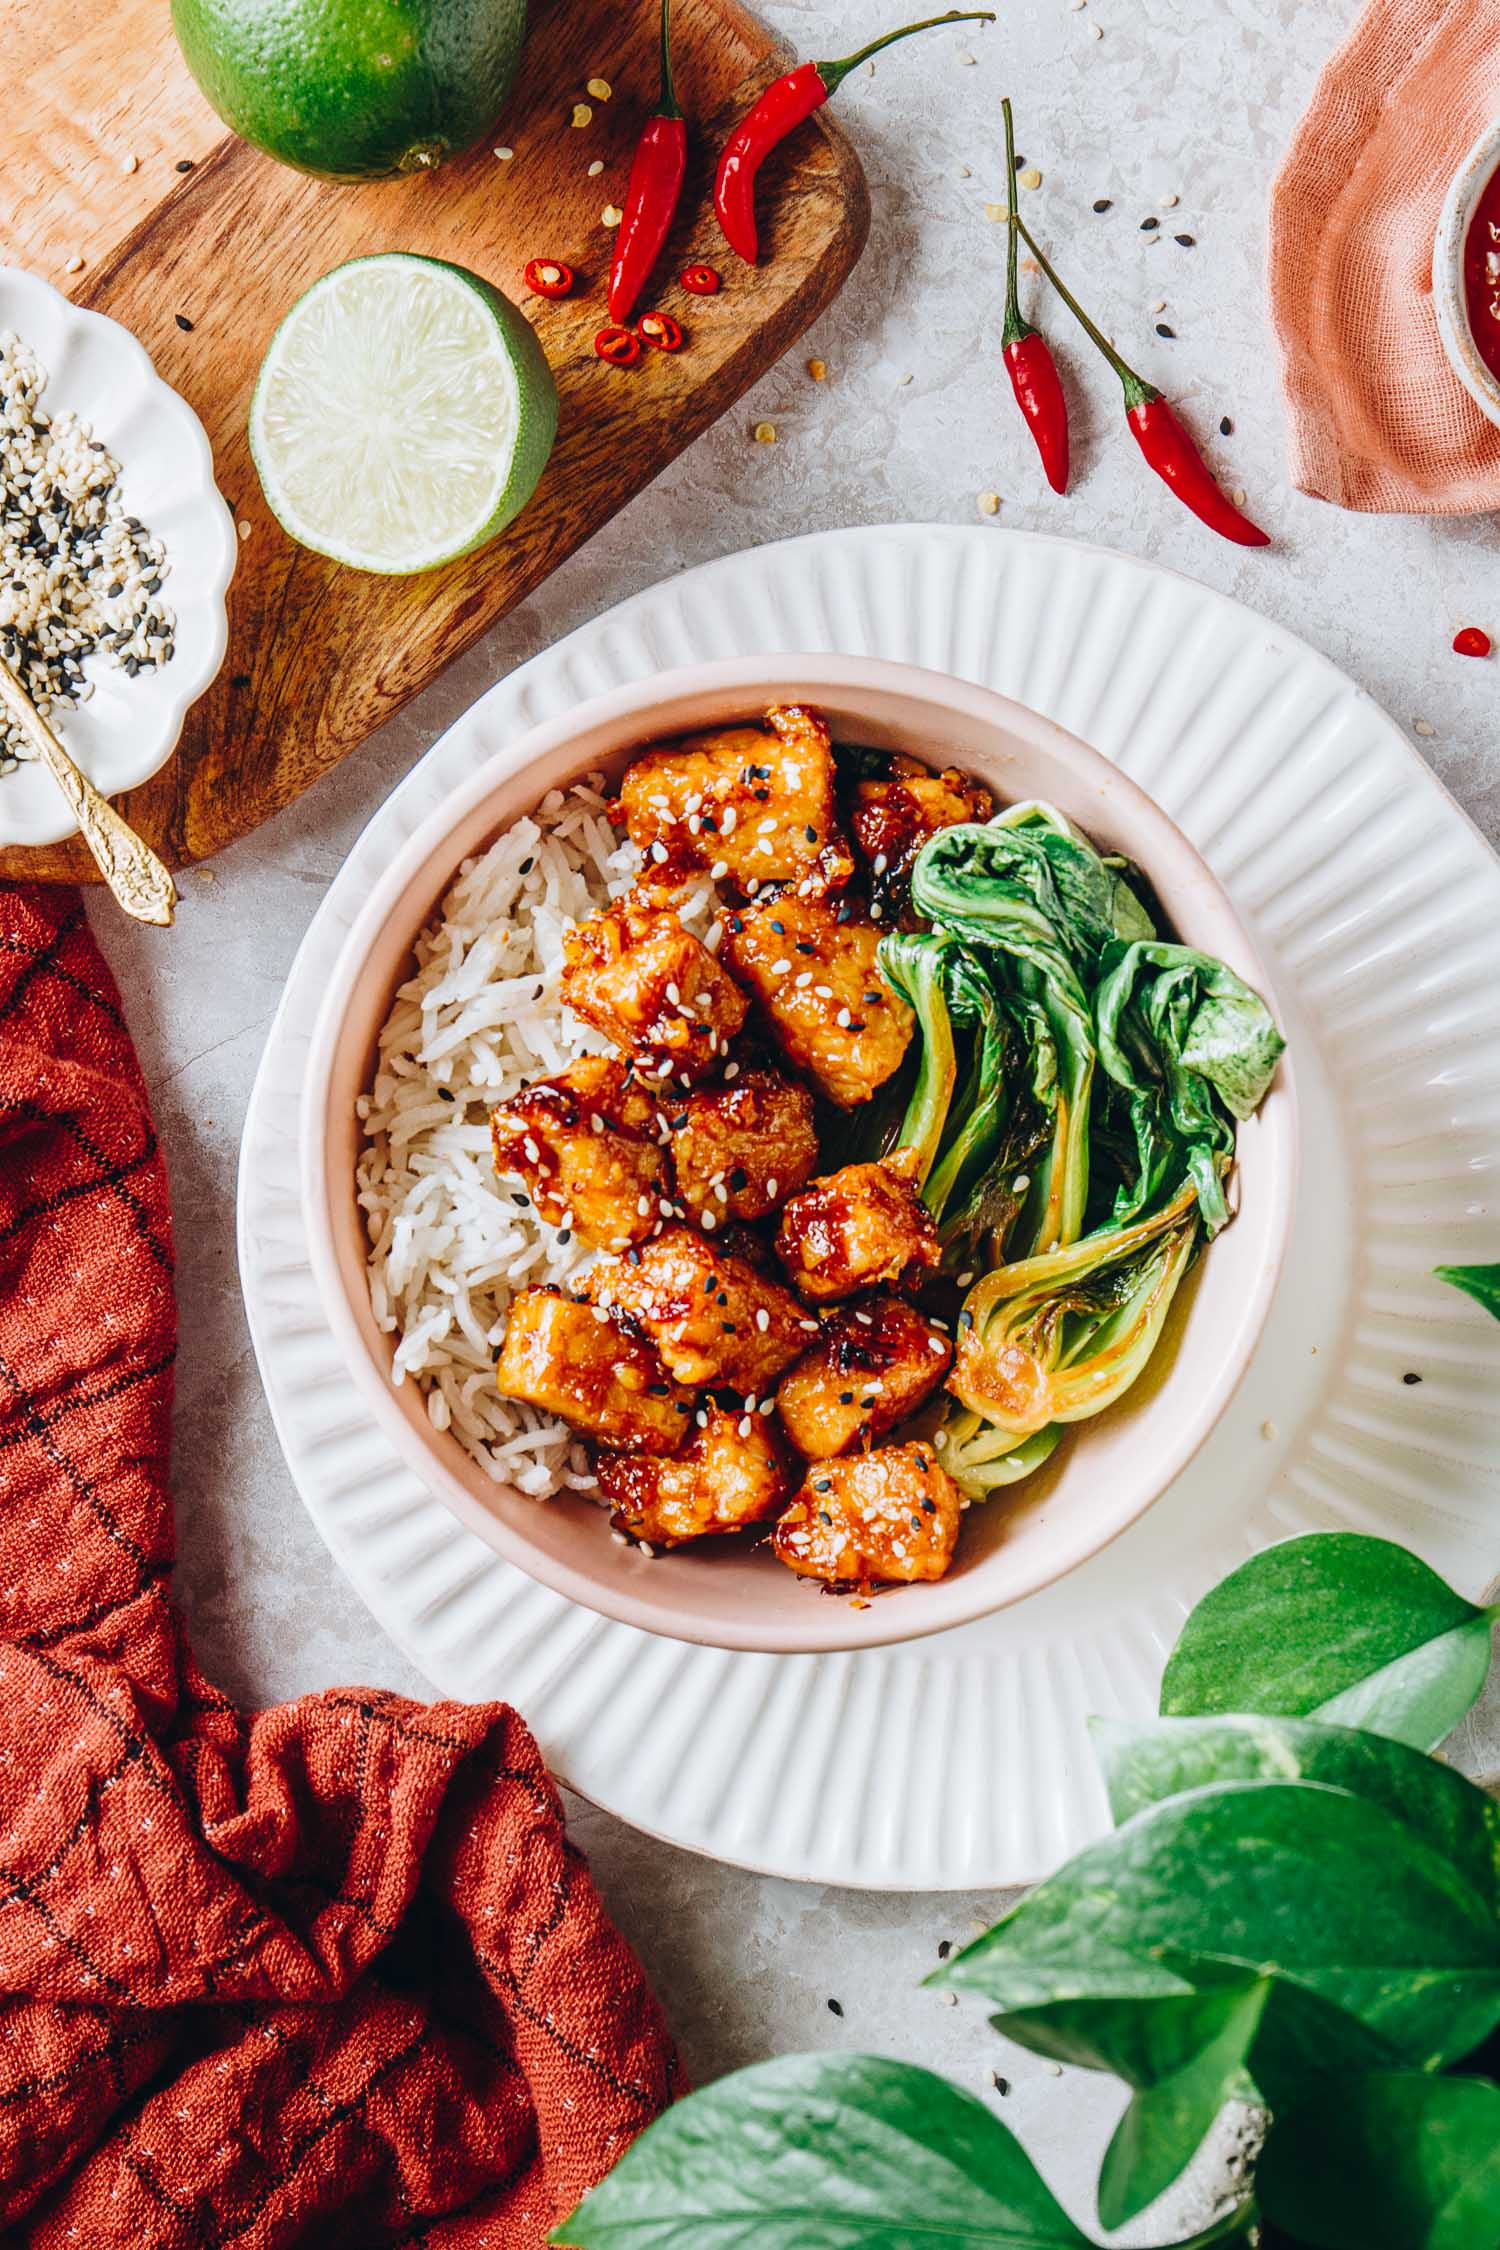 Murielle Banackissa - Food 52 - Apricot glazed tempeh